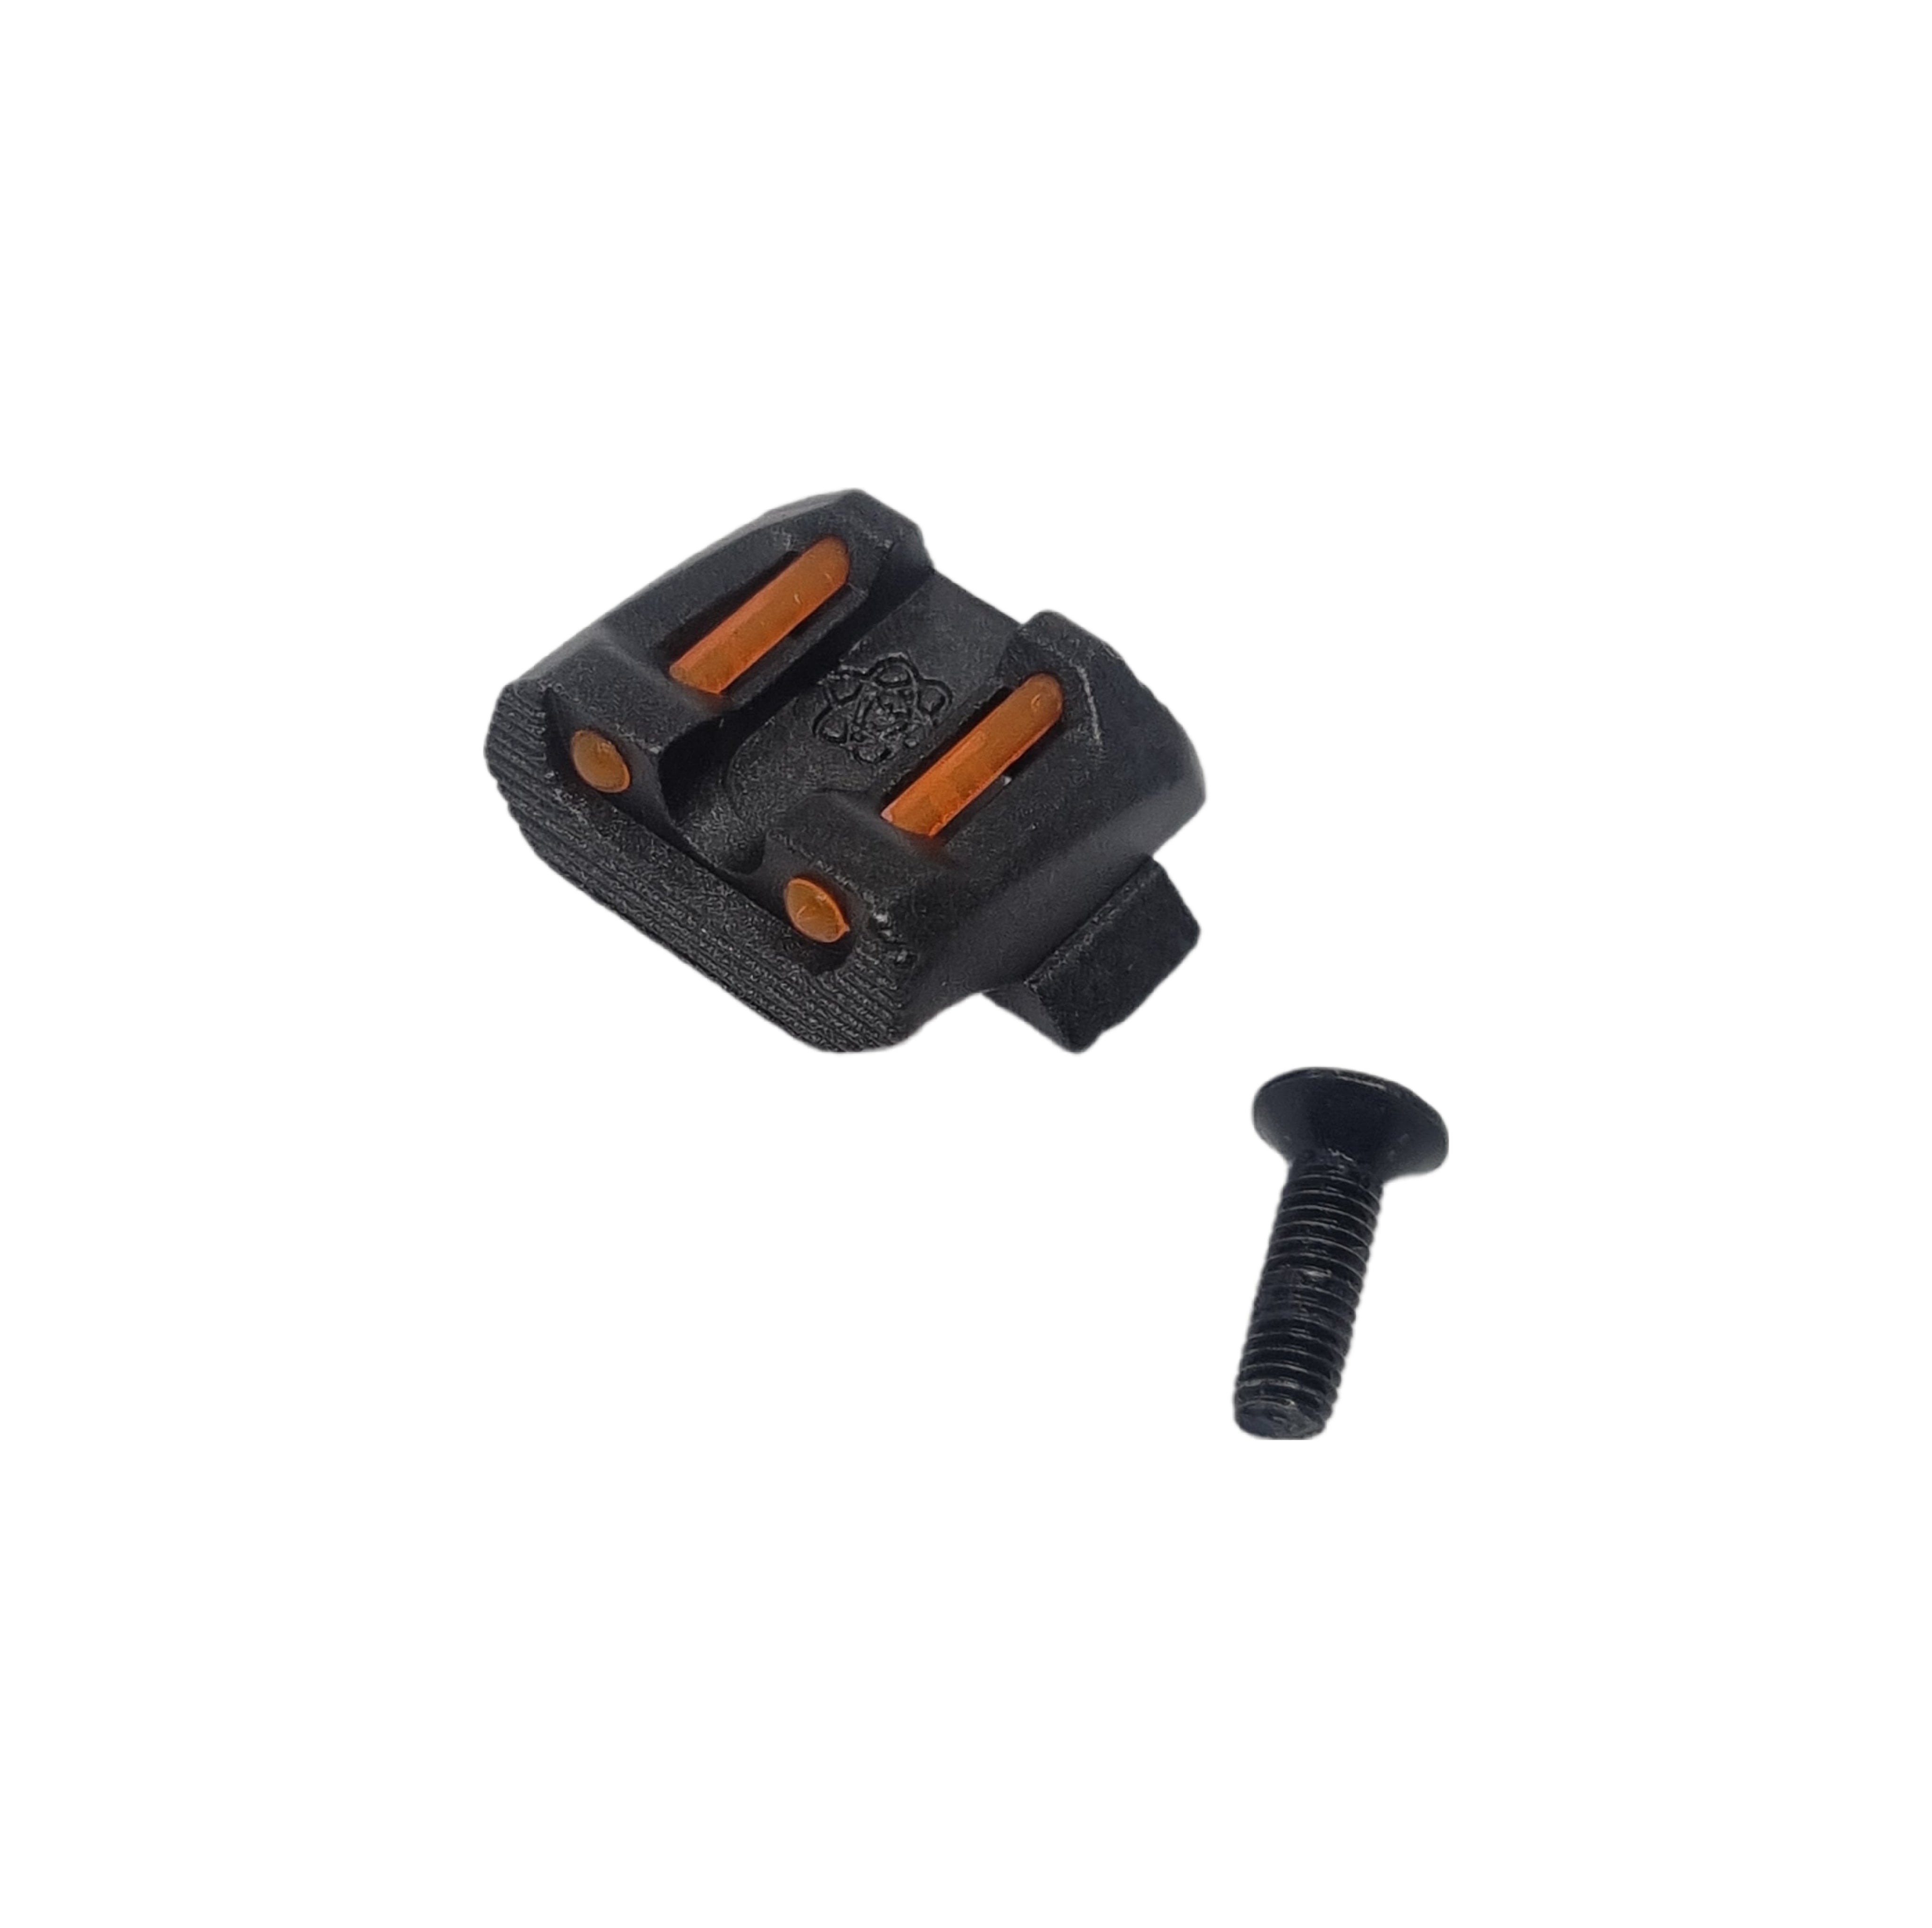 WE G17 G18c replacement part - rear sight and screw